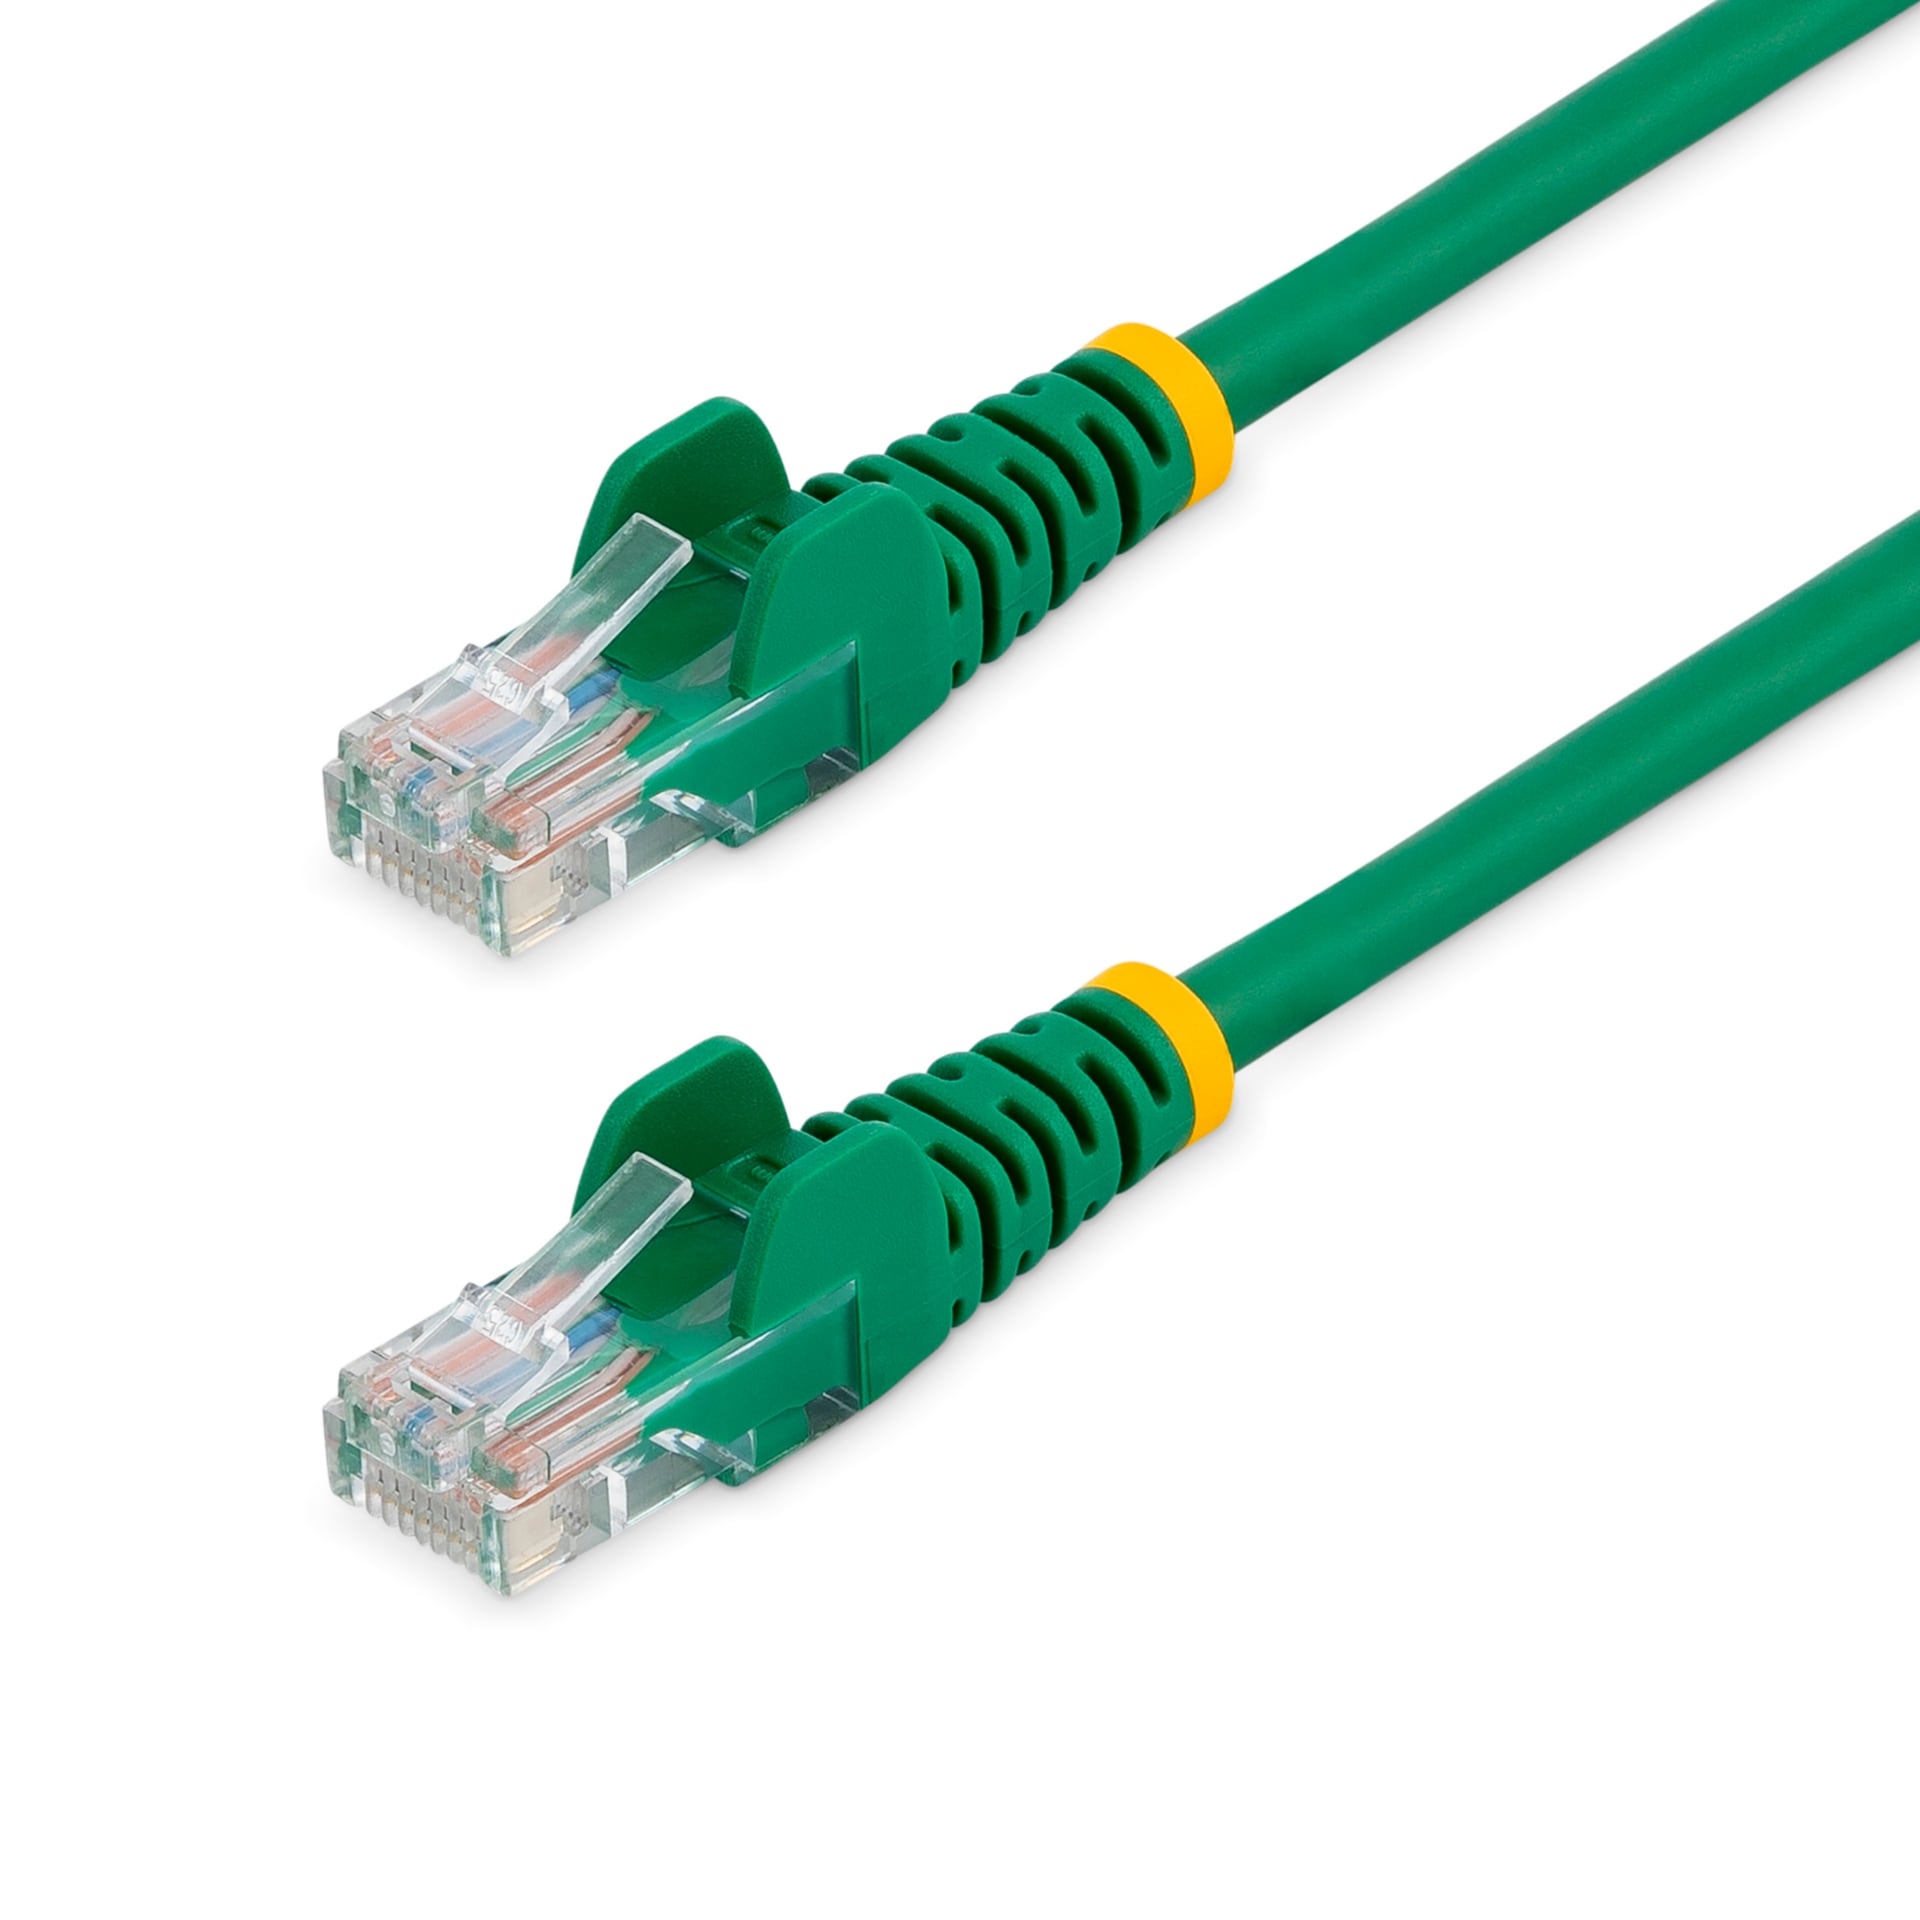 StarTech.com Cat5e Ethernet Cable 6 ft Green - Cat 5e Snagless Patch Cable